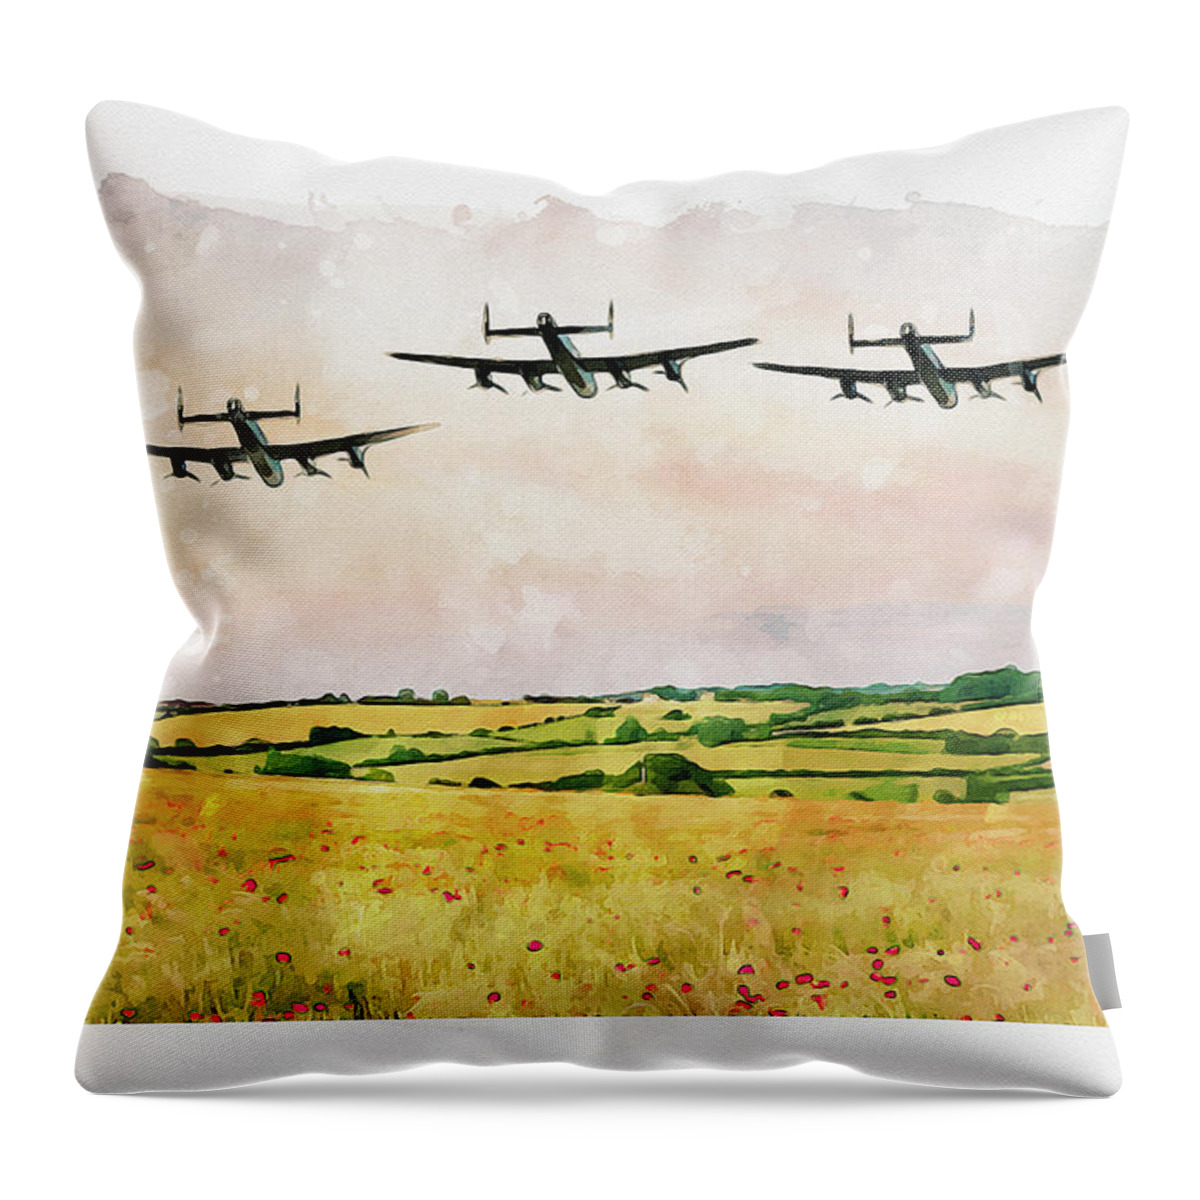 Art Throw Pillow featuring the digital art Our Bomber Boys by Airpower Art